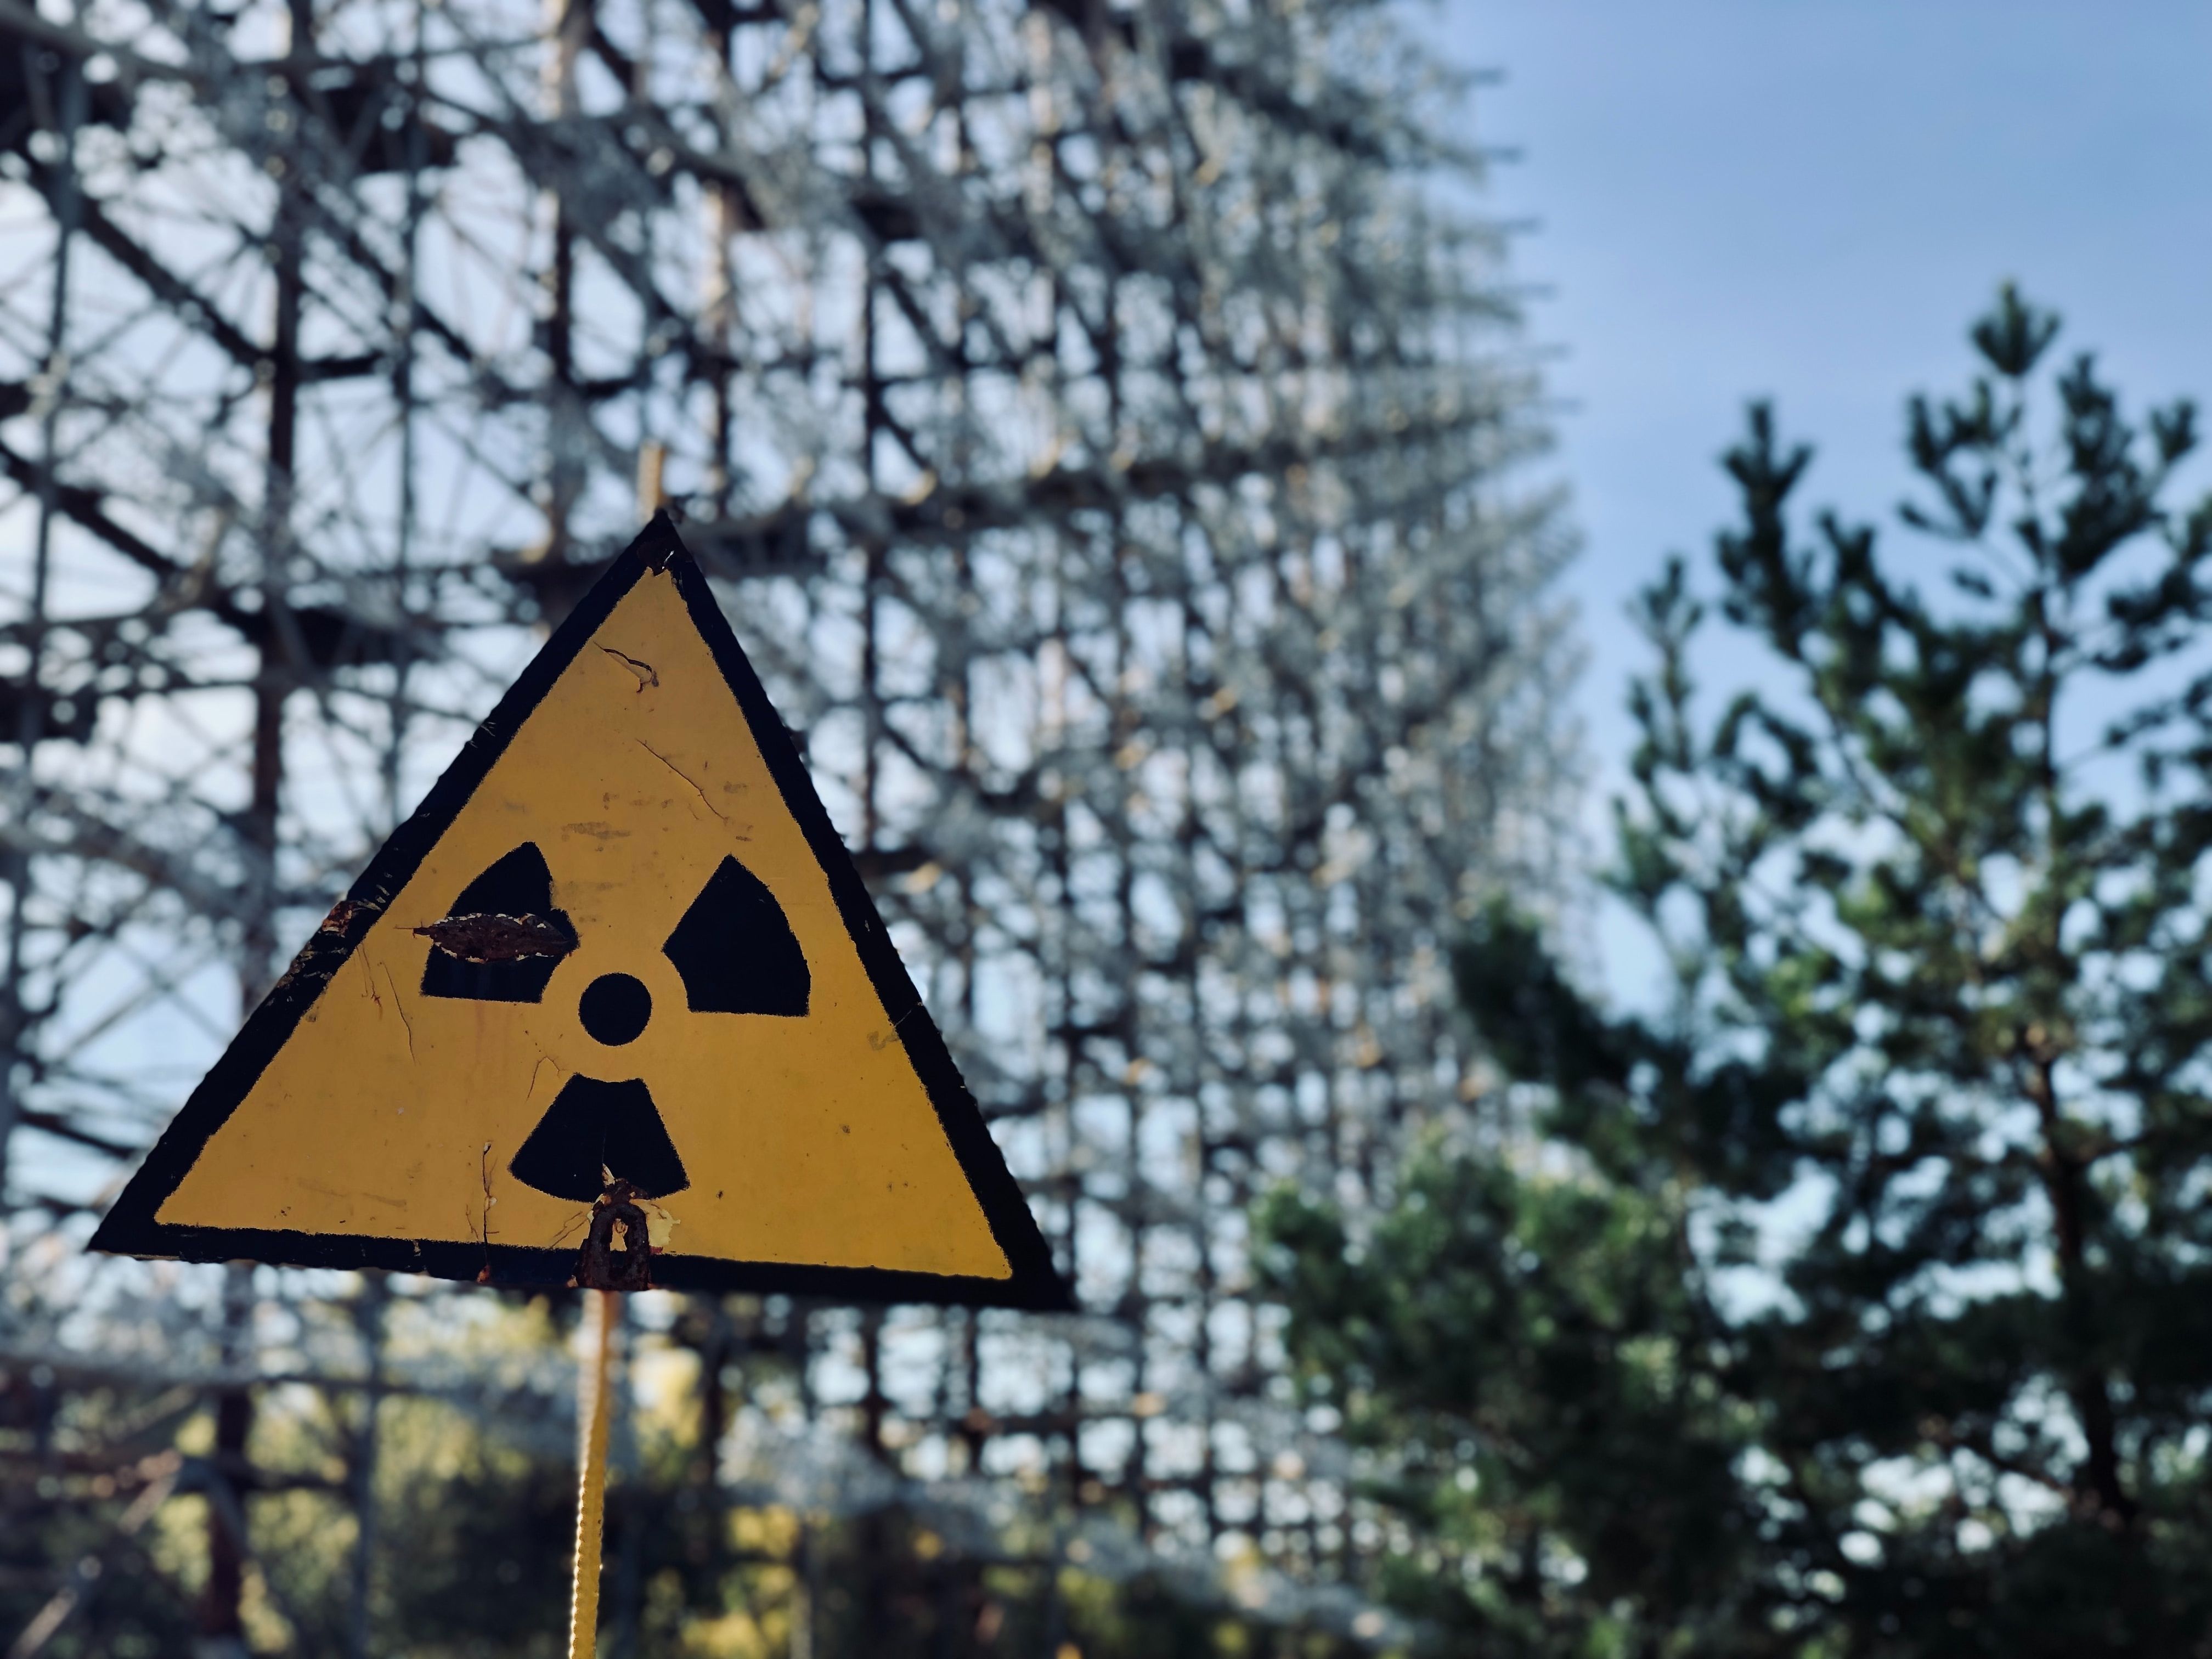 Nuclear sign in Chernobyl